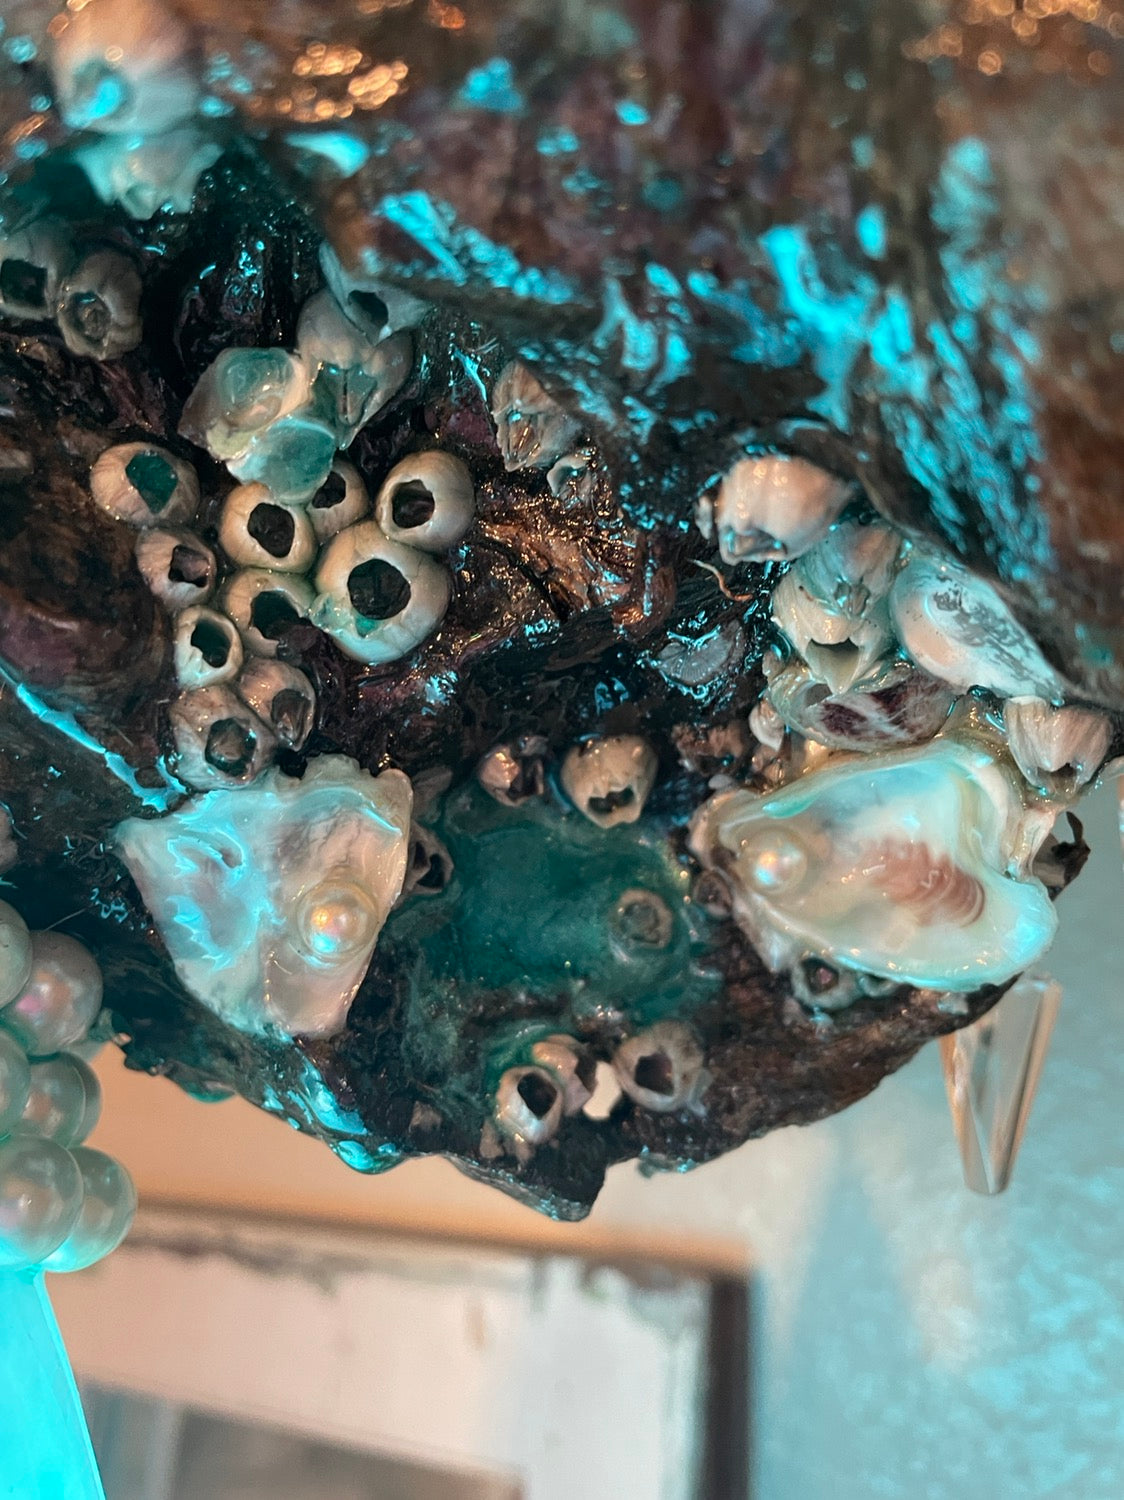 epoxy rein barnacles and tide-pool driftwood